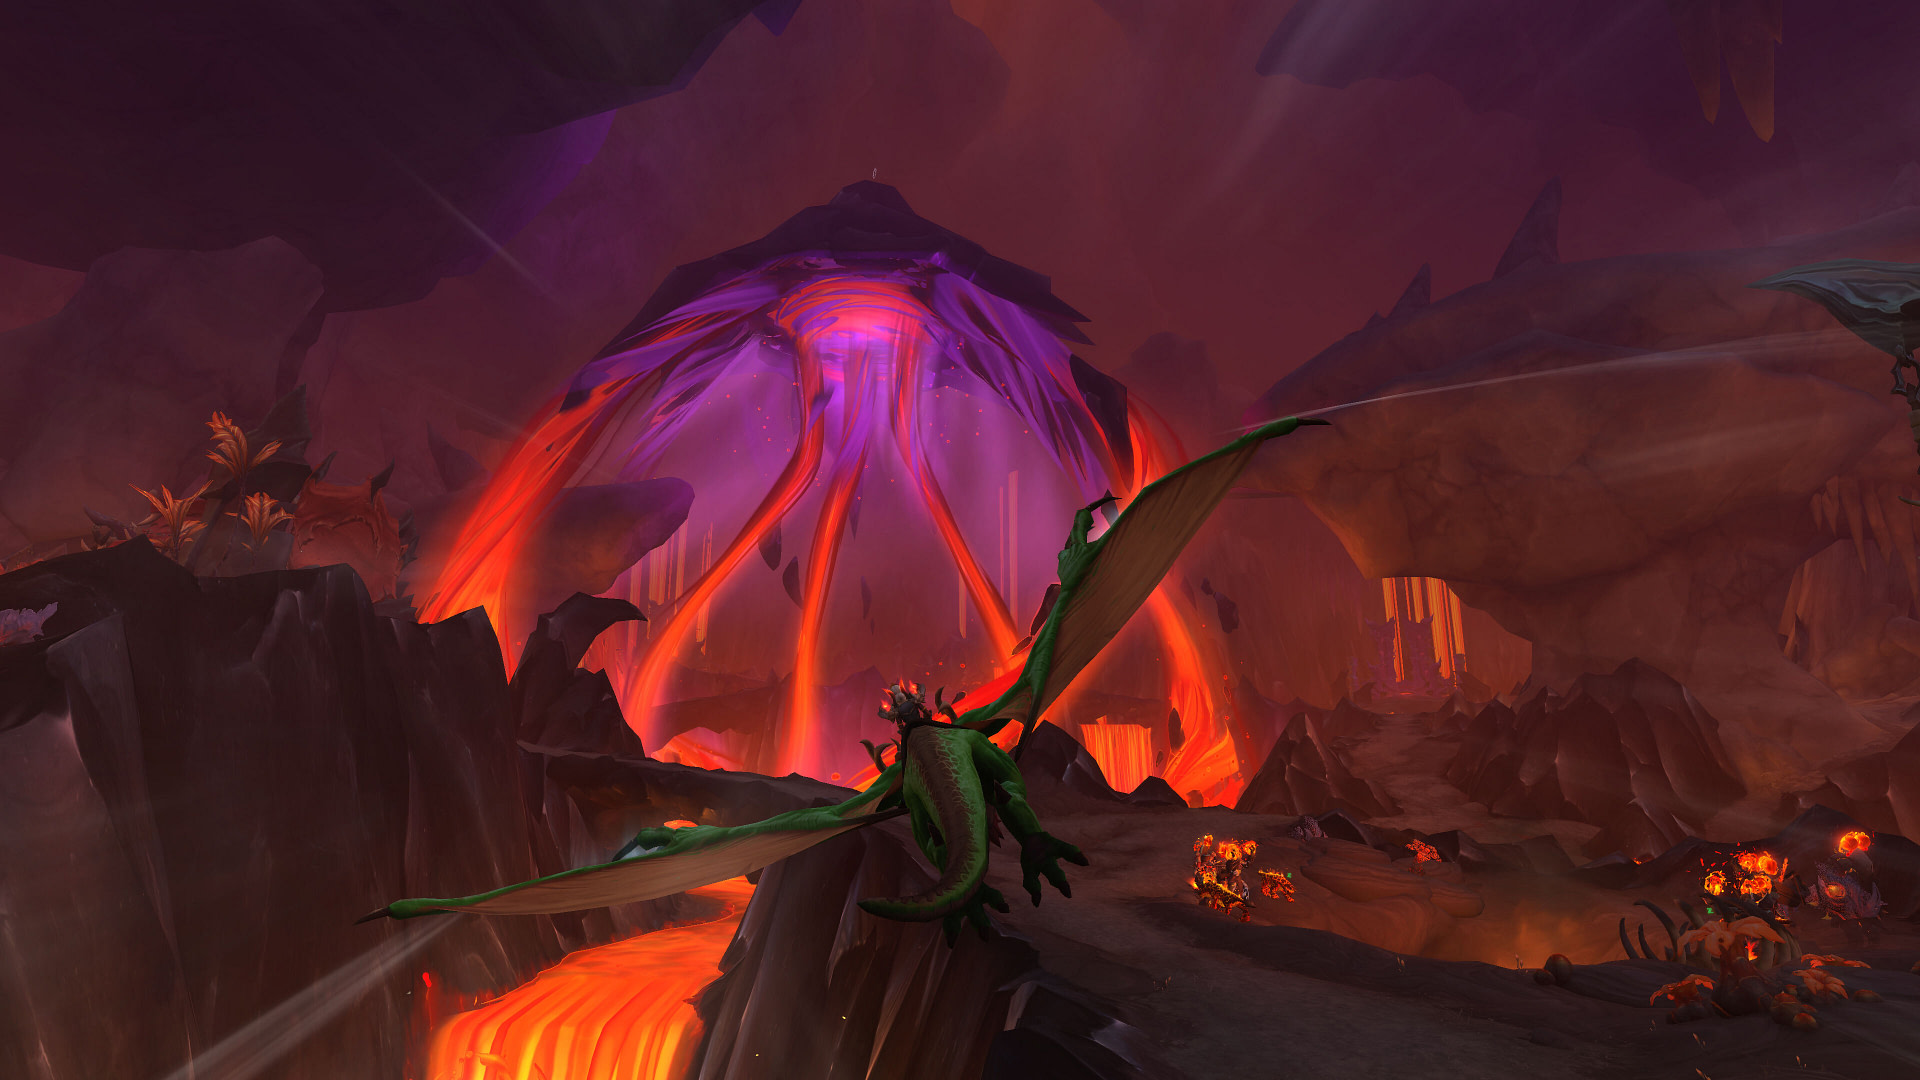 WoW: Dragonflight’s Embers Of Neltharion Update Takes Players Deep Underground To Discover Deathwing’s Secrets